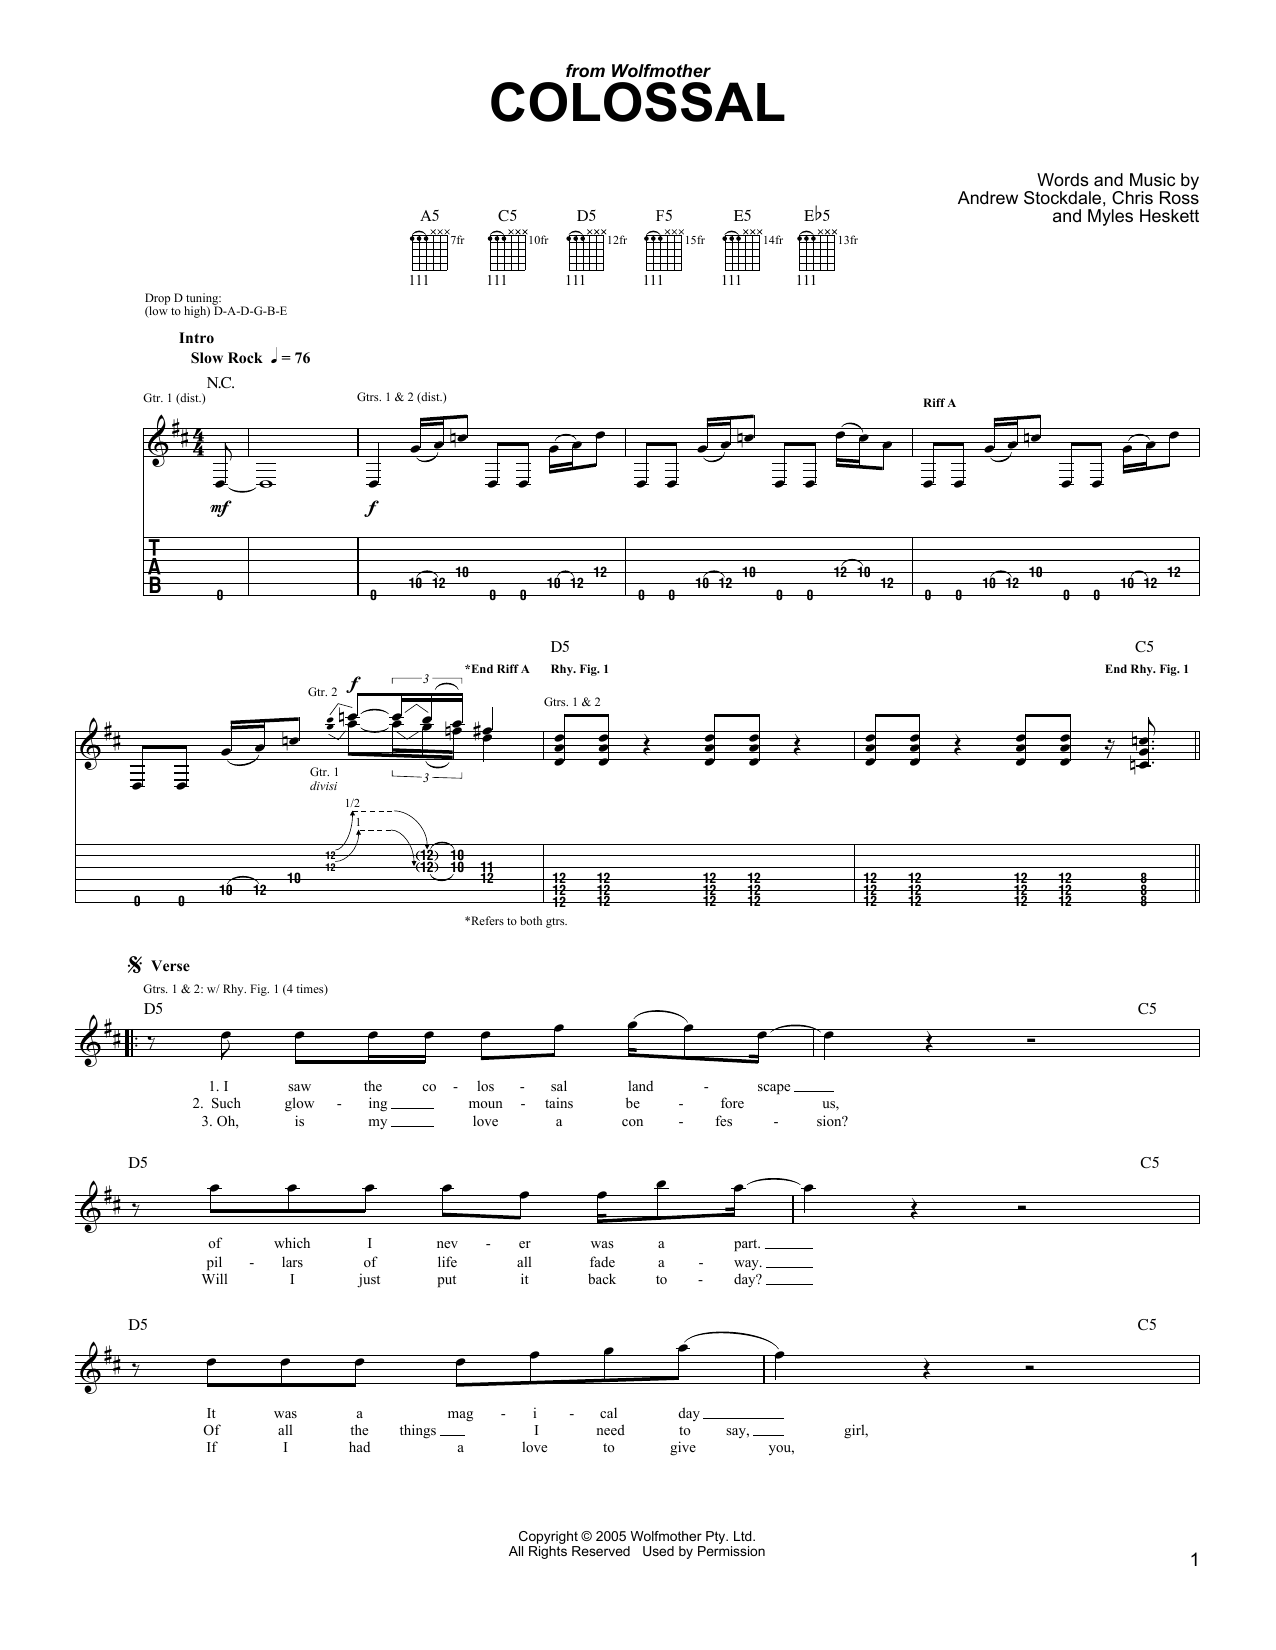 Download Wolfmother Colossal Sheet Music